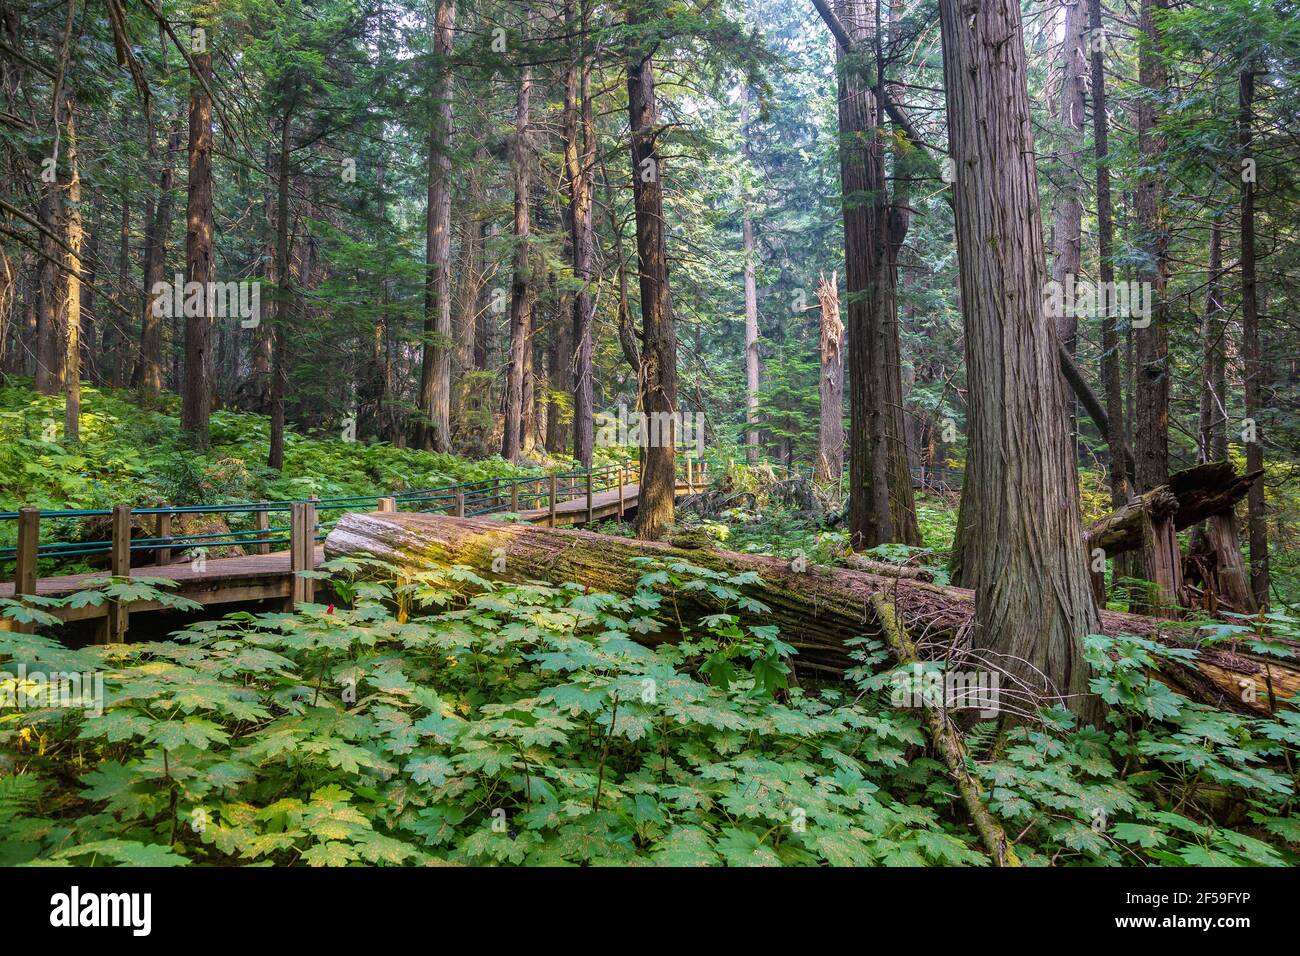 Geographie / Reisen, Kanada, Glacier National Park, Hemlock Grove Boardwalk, Additional-Rights-Clearance-Info-not-available Stockfoto